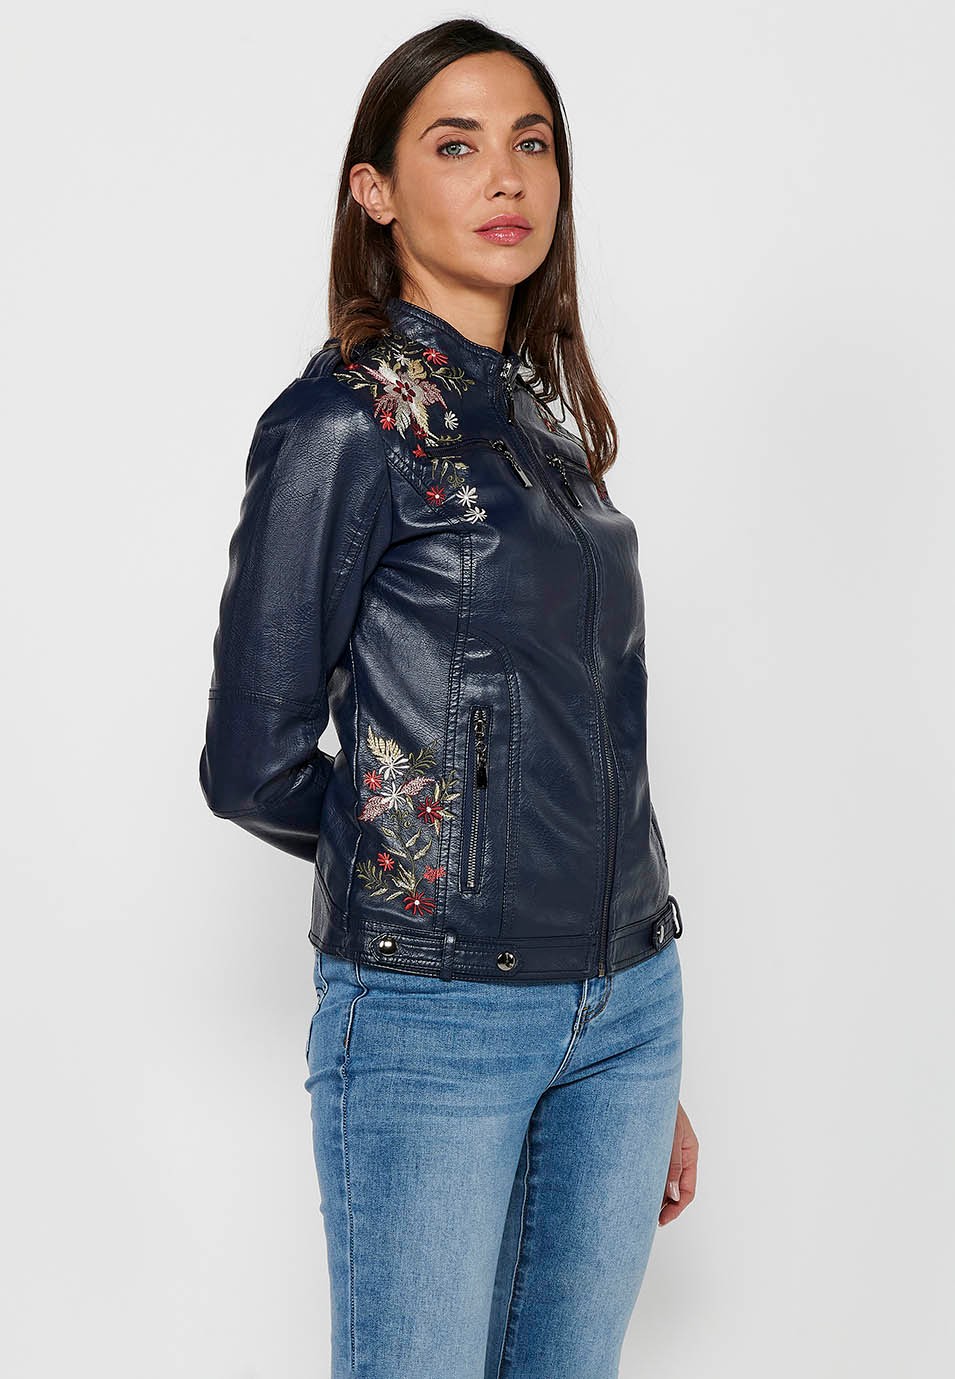 Leather-effect jacket with front zipper closure with floral embroidered details with round neck and front pockets in Navy for Women